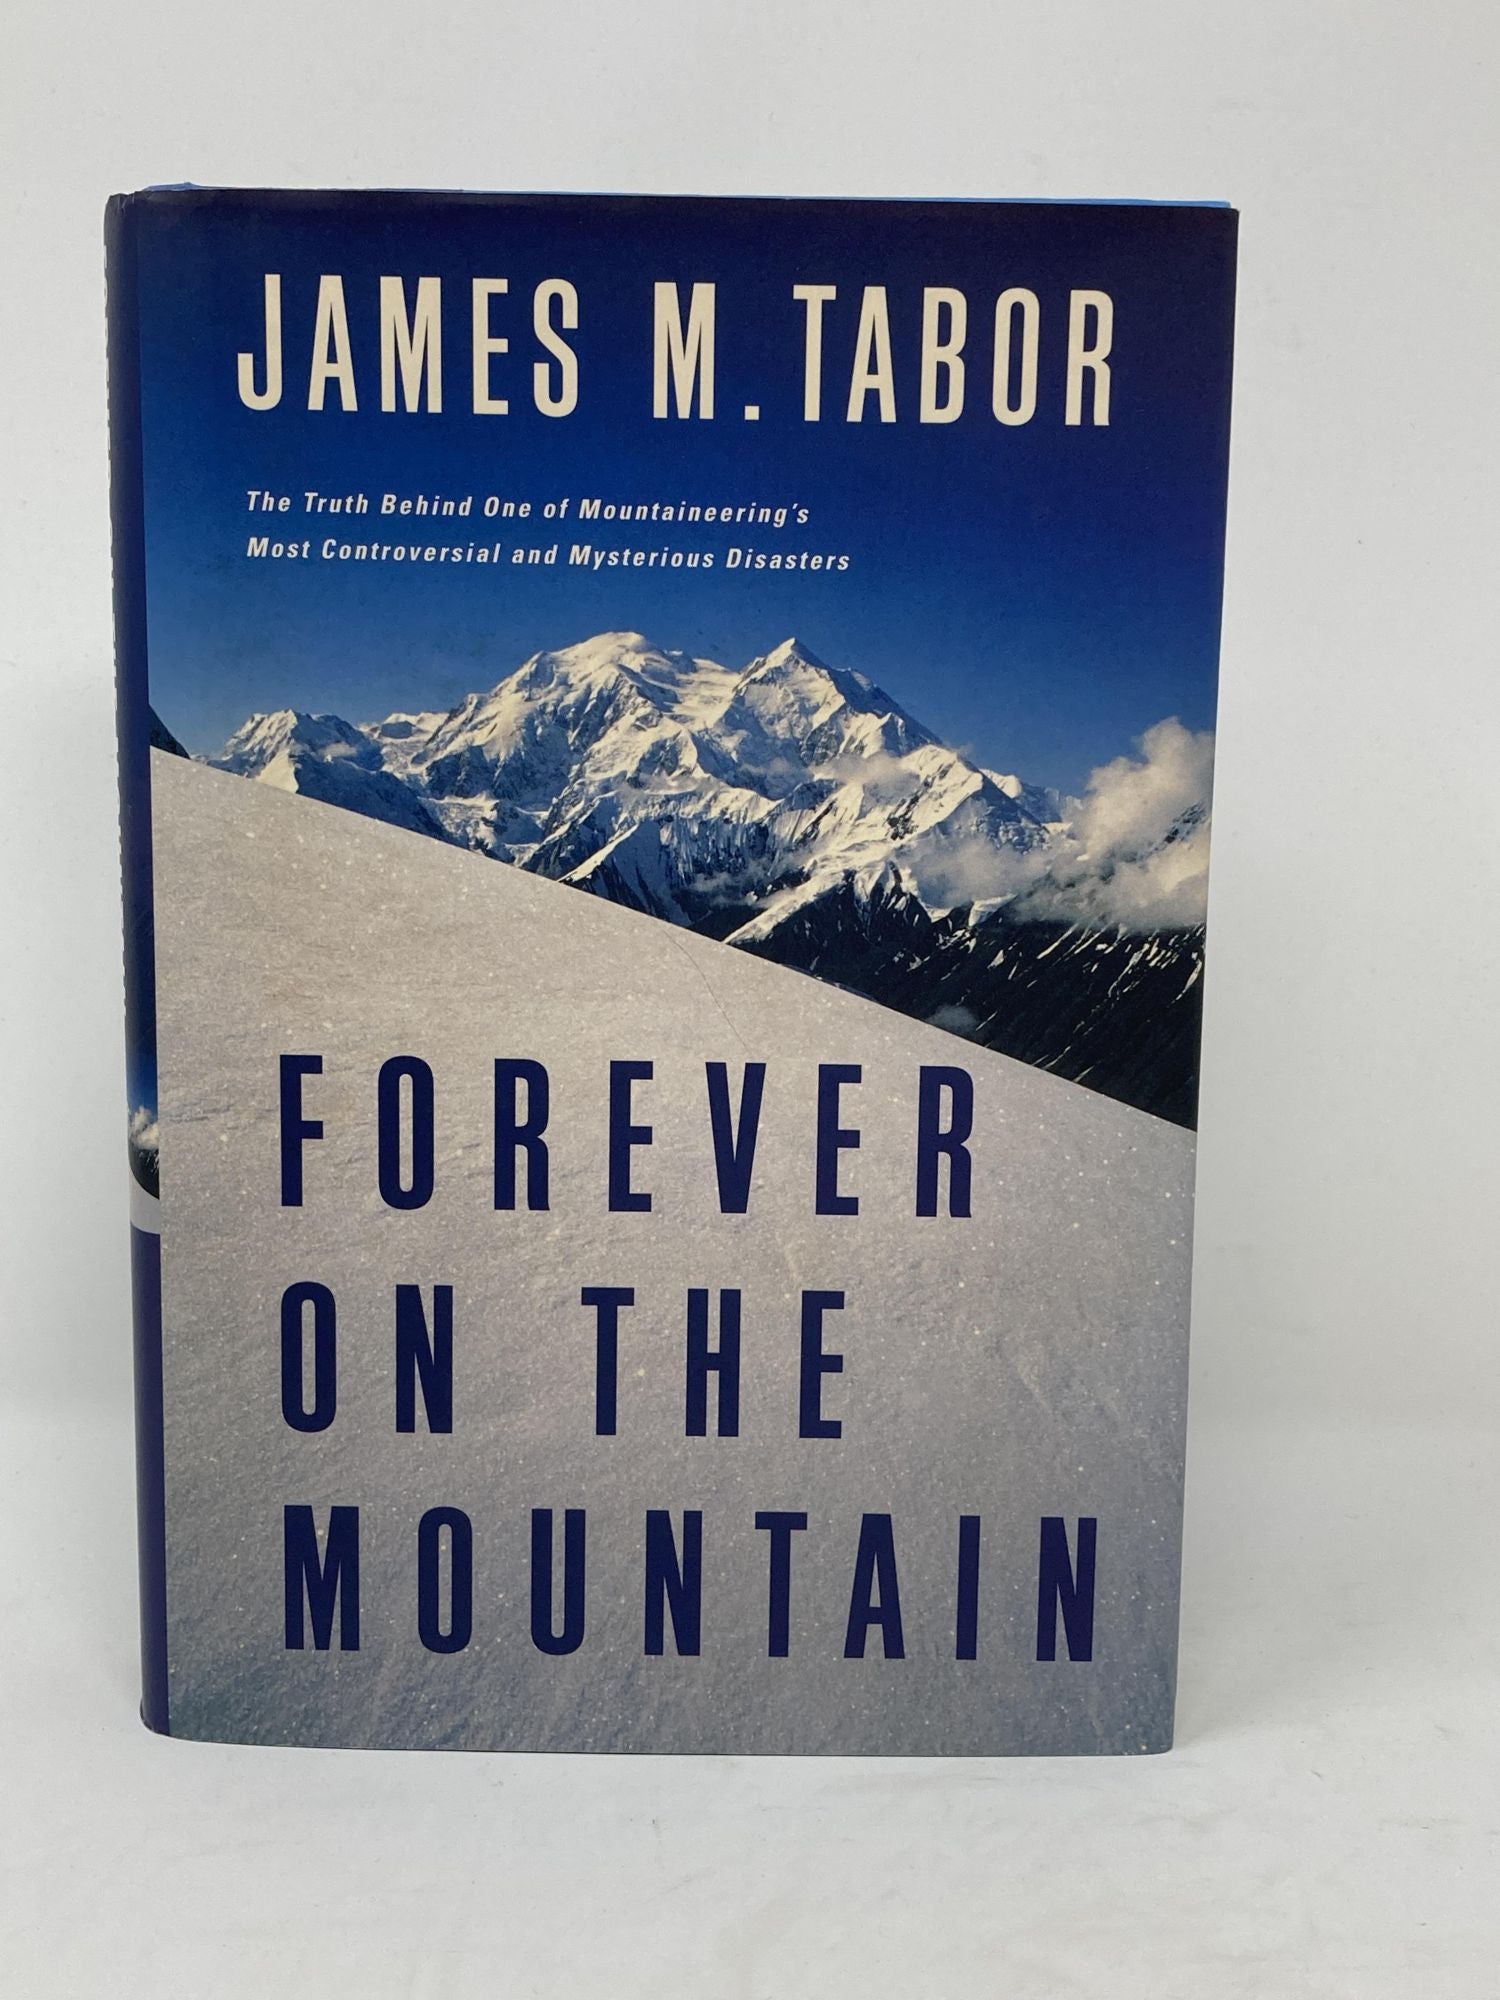 Tabor, James M. - Forever on the Mountain, the Truth Behind One of Mountaineering's Most Controversial and Mysterious Disasters (with Publisher's Release Letter Laid-in)